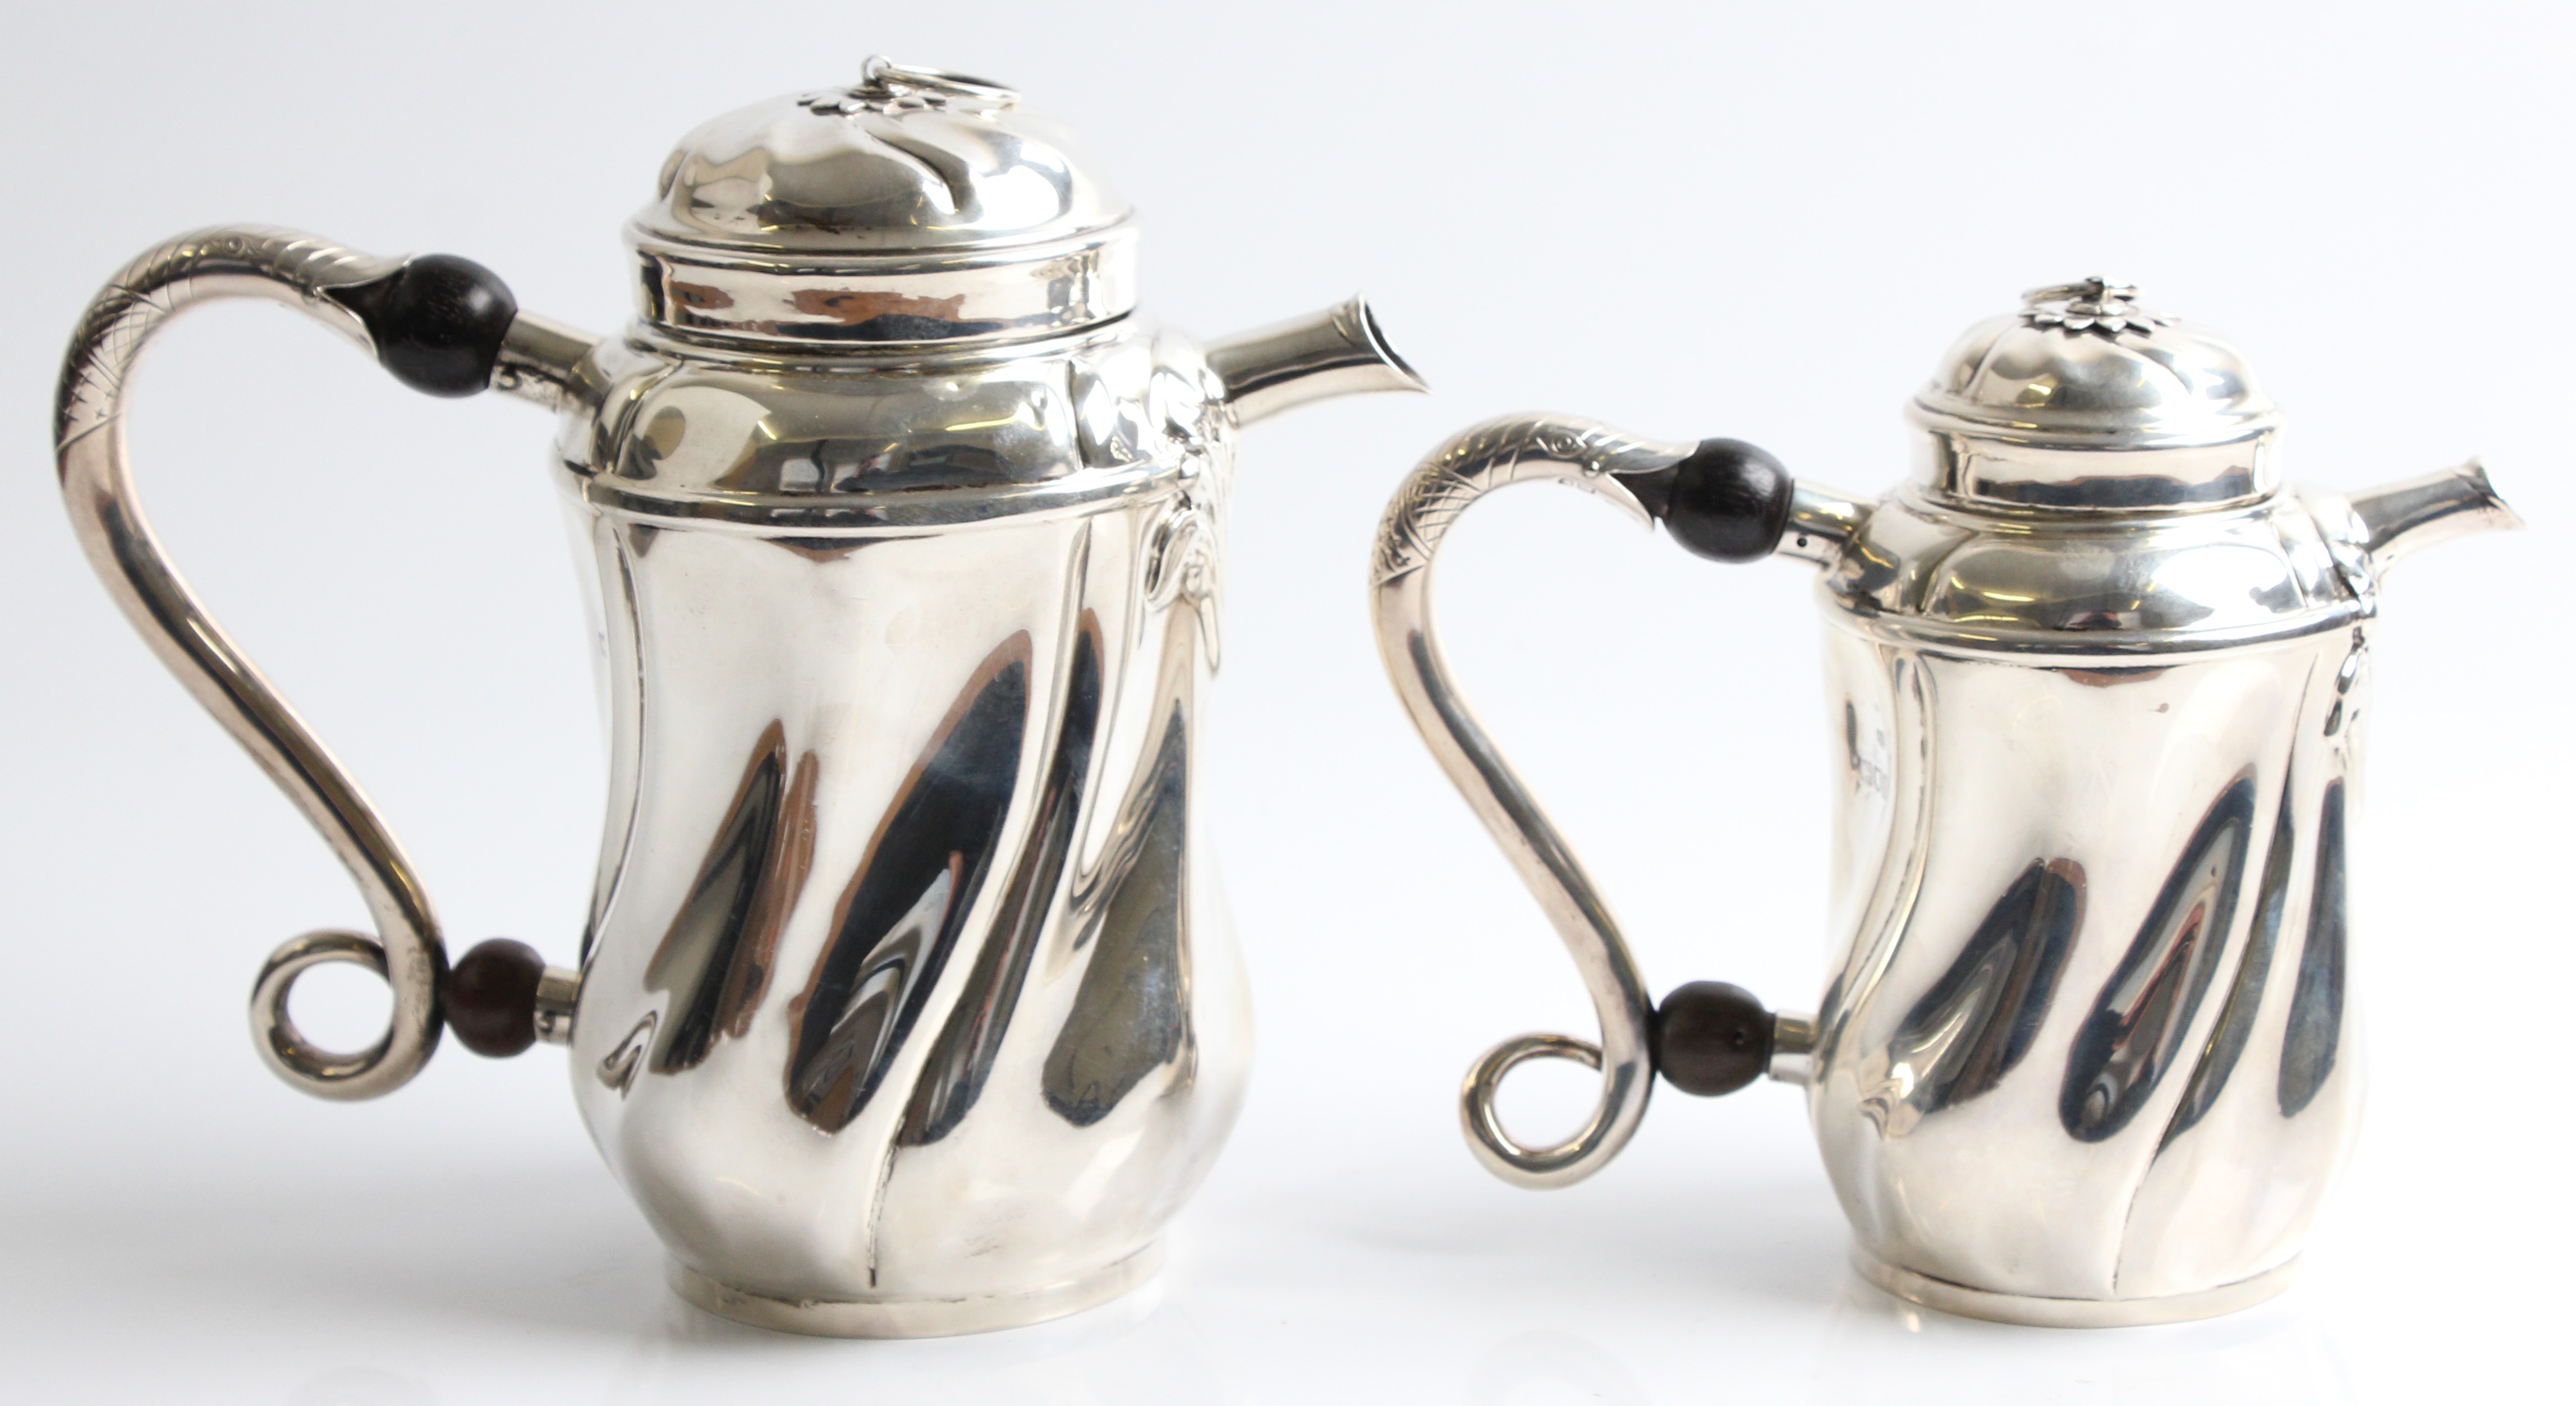 A Goldsmiths & Silversmiths Company silver coffee pot and tea pot, both of swirled design, with fish